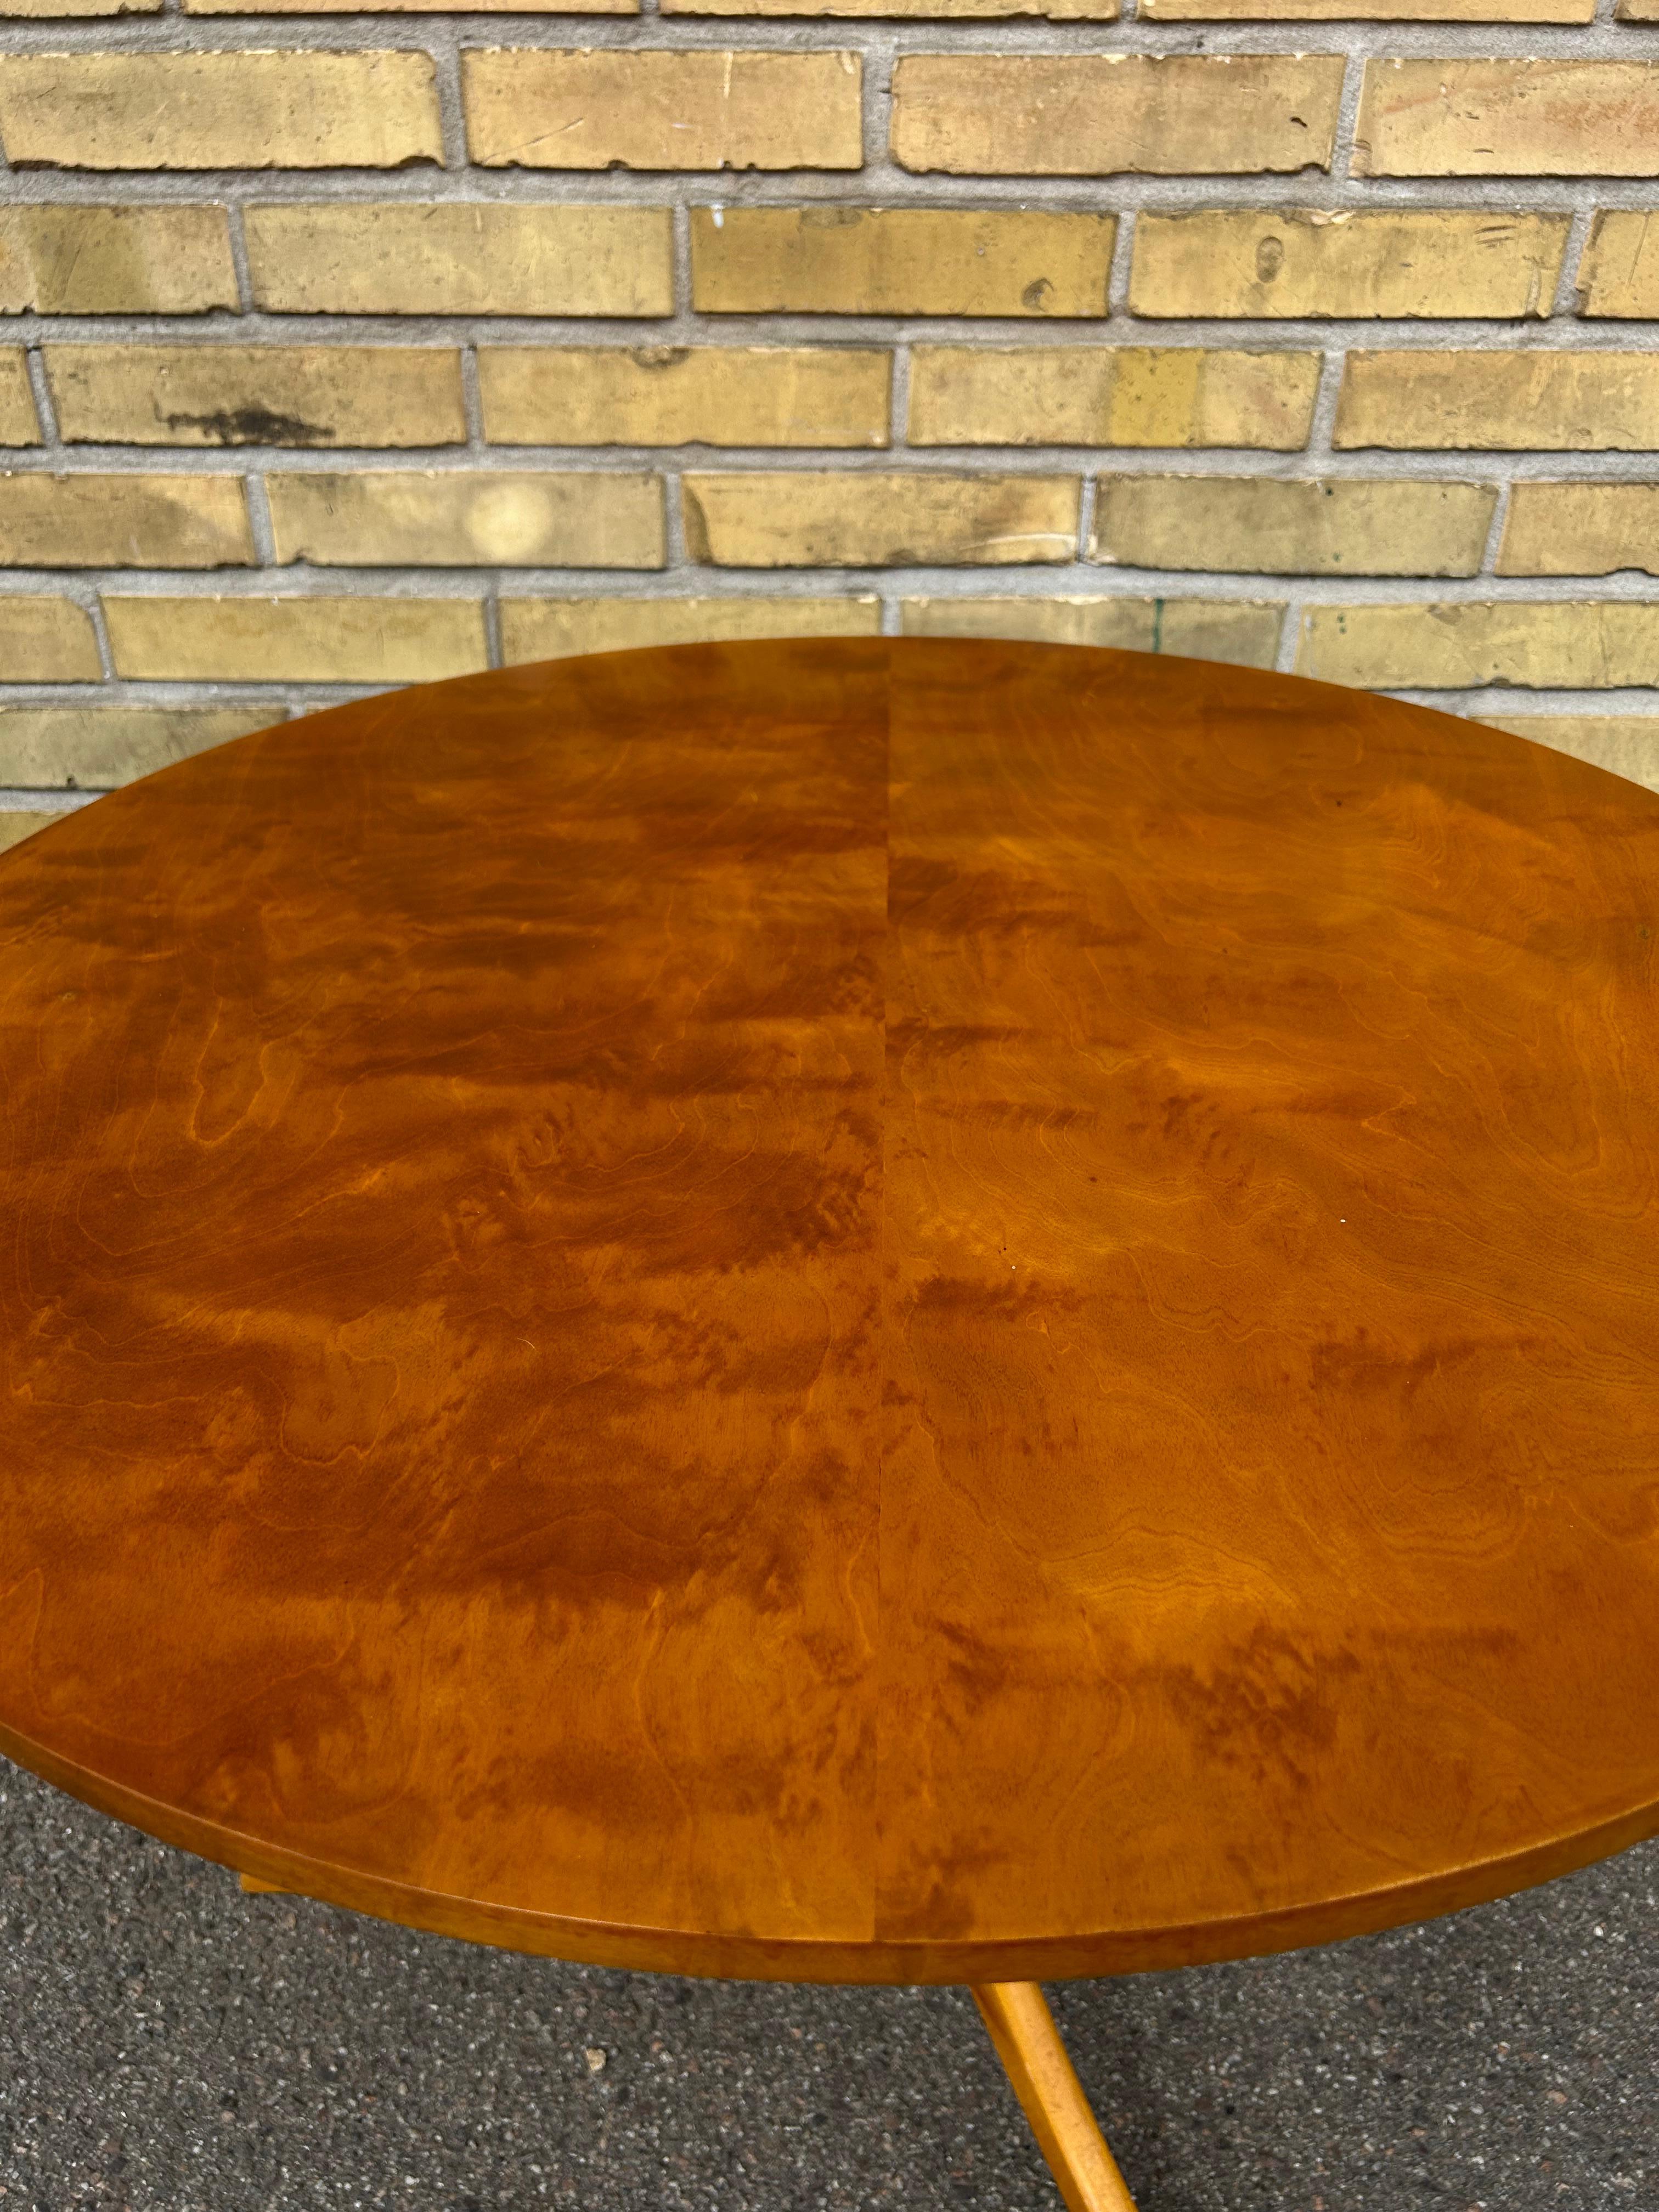 Rare and important elegant Swedish coffe table in Flamed birch and birch by an unknown Swedish manufacturer, the table is very similar to pieces by Austrian/Swedish designer Josef Frank (1885 to 1967) who worked for the Swedish design company